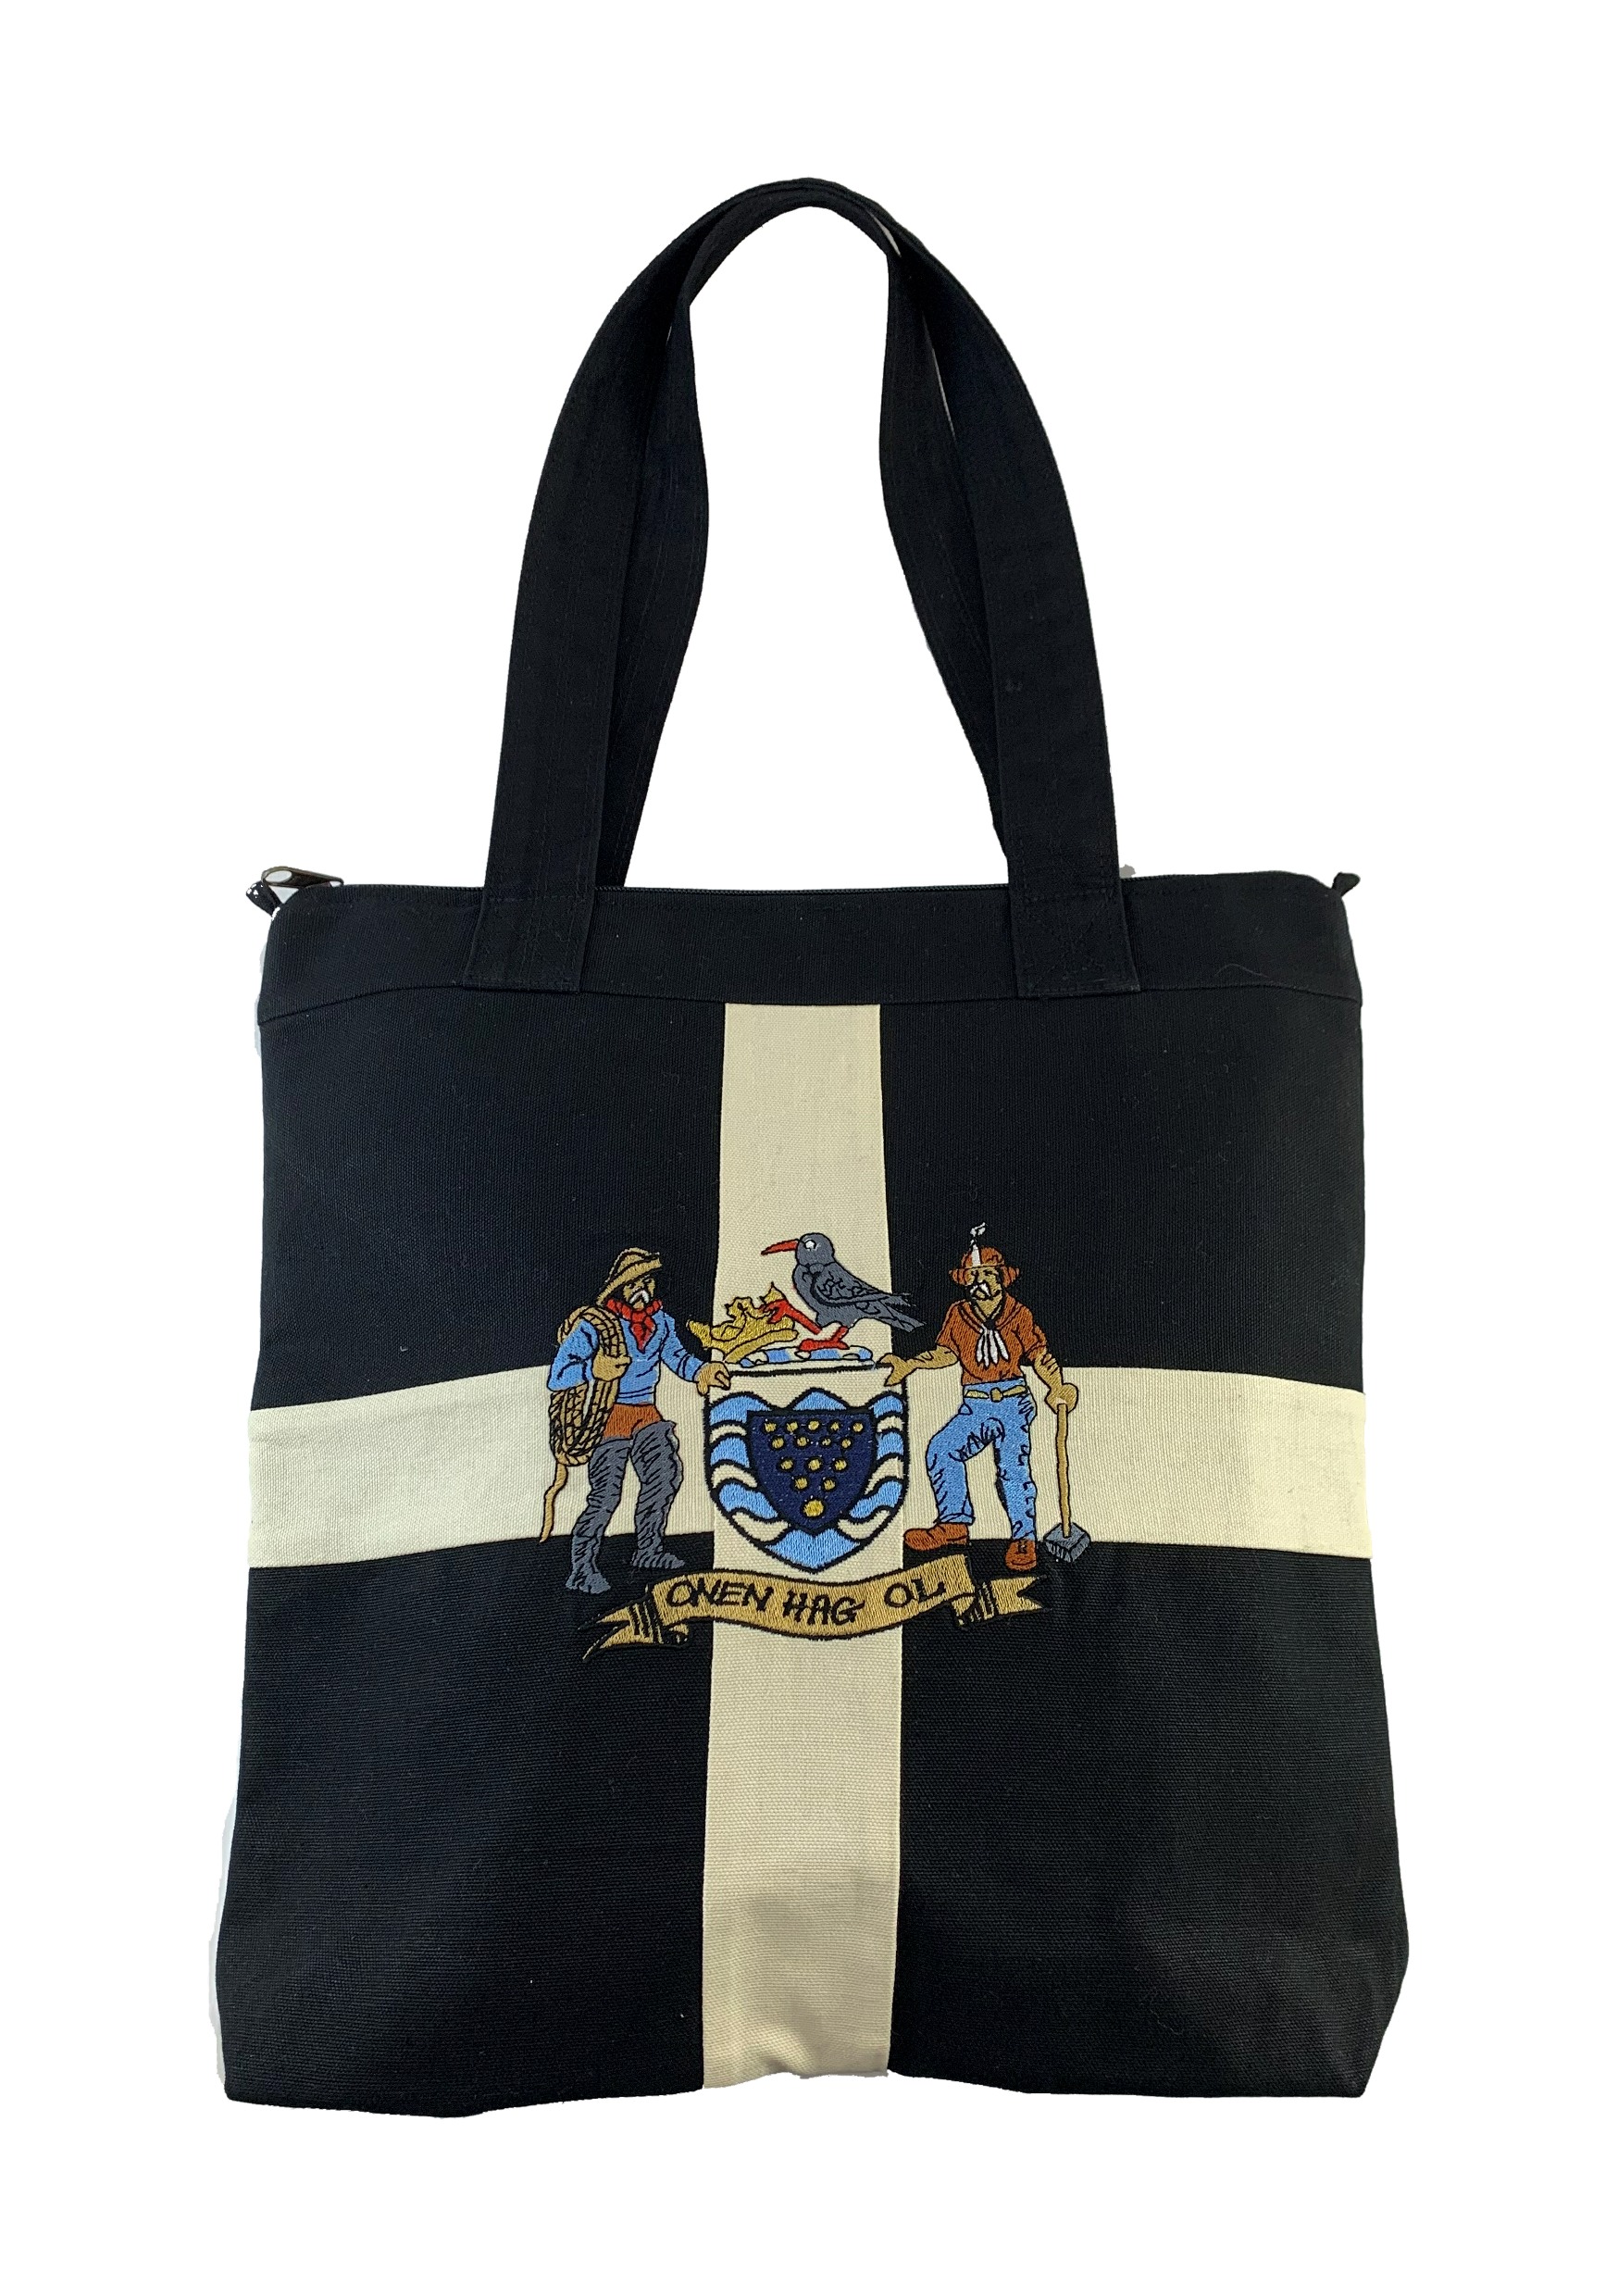 Cornwall Flag and Crest Tote/Shopping Bag